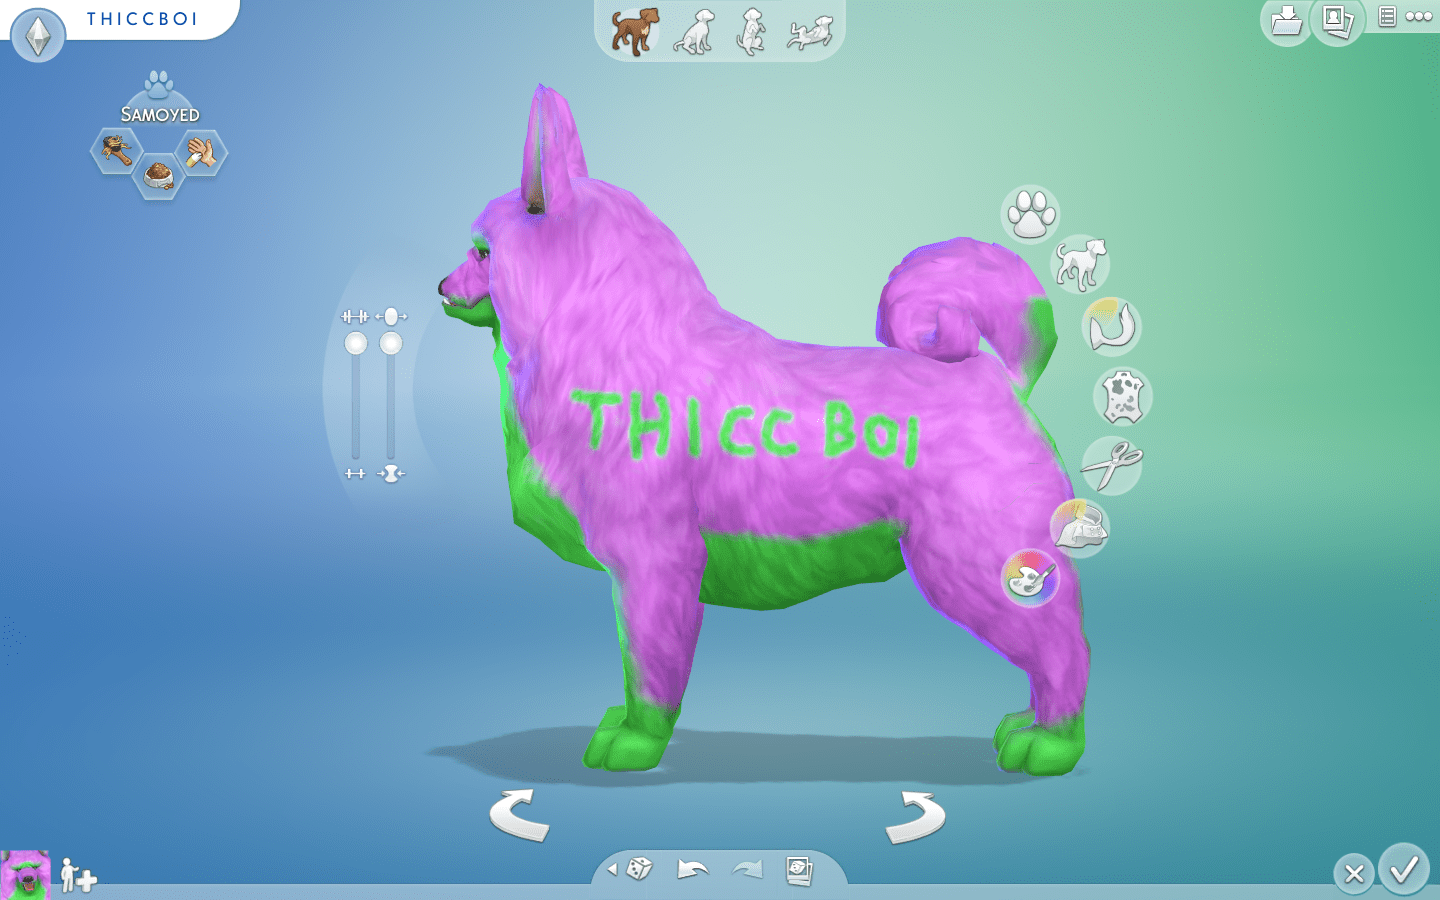 Sims Players’ New Pets Are Just The Worst